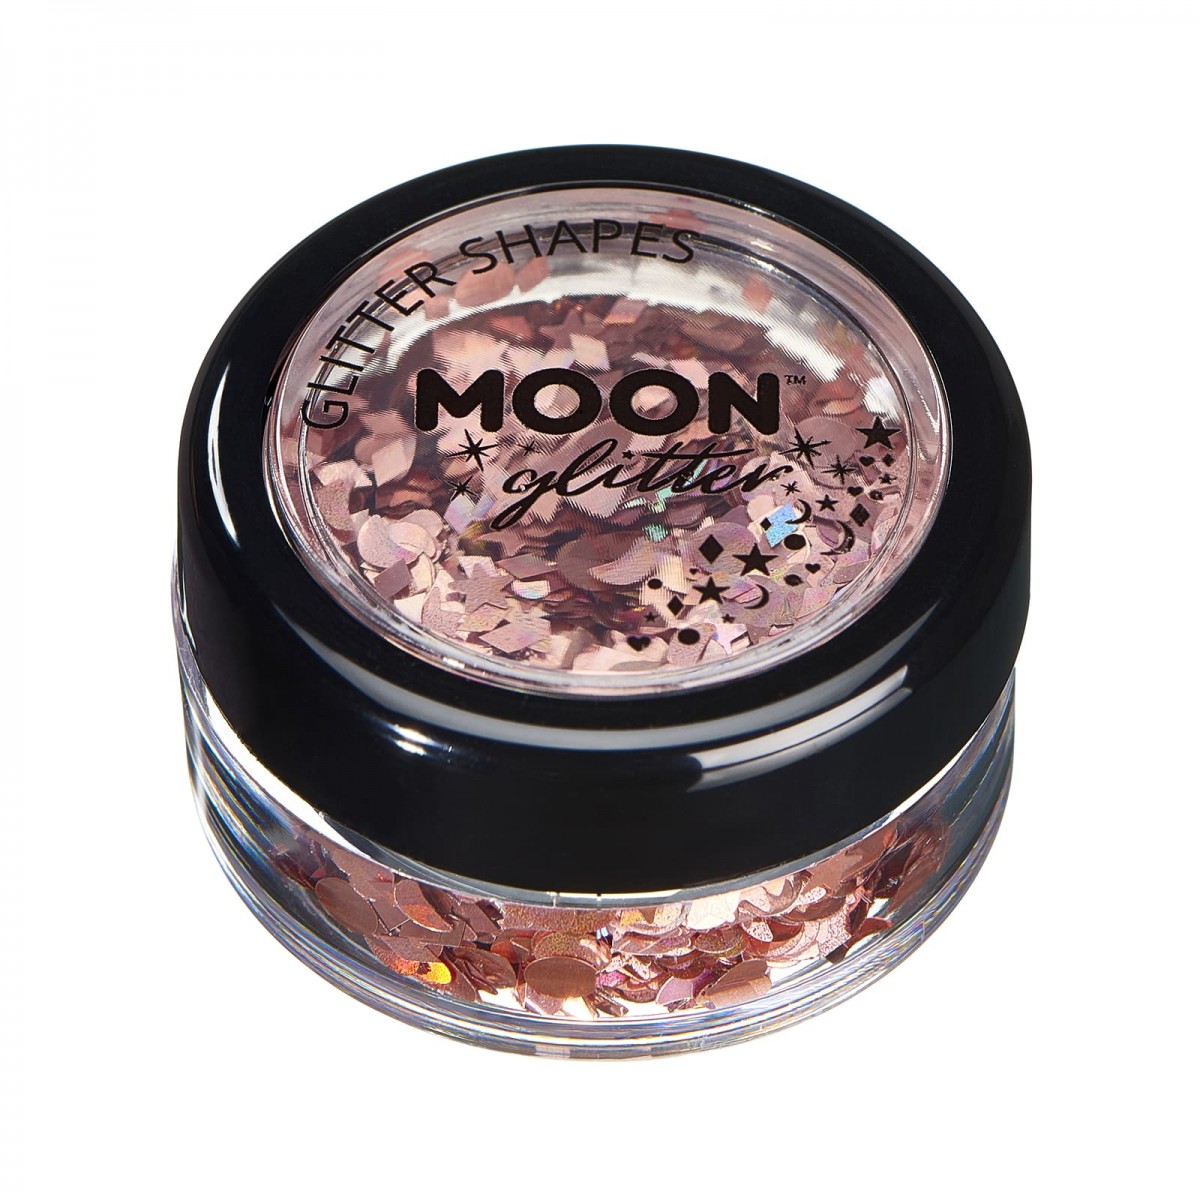 MOON CREATIONS G31 HOLOGRAPHIC GLITTER SHAPES ROSE GOLD 3g